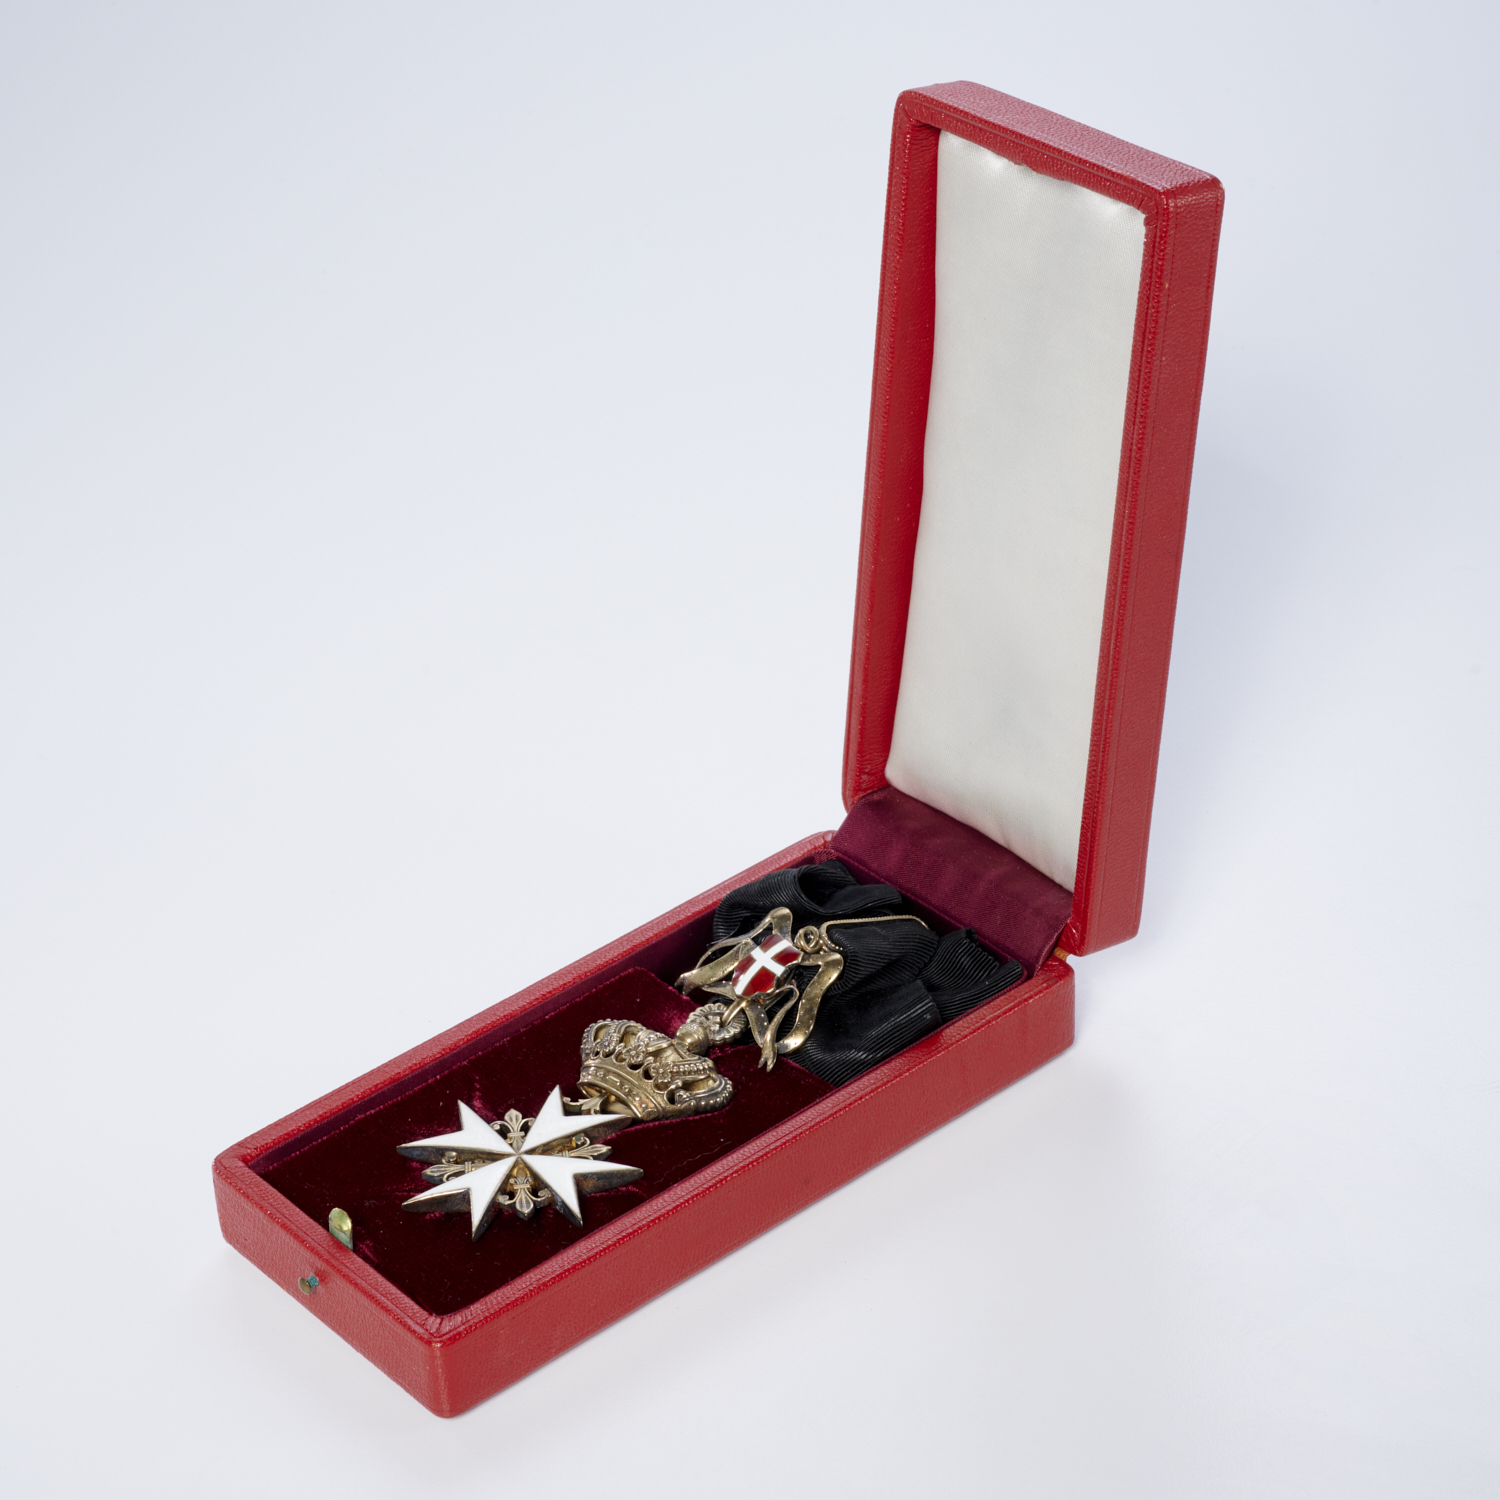 ORDER OF MALTA KNIGHT OF HONOR 360bcc